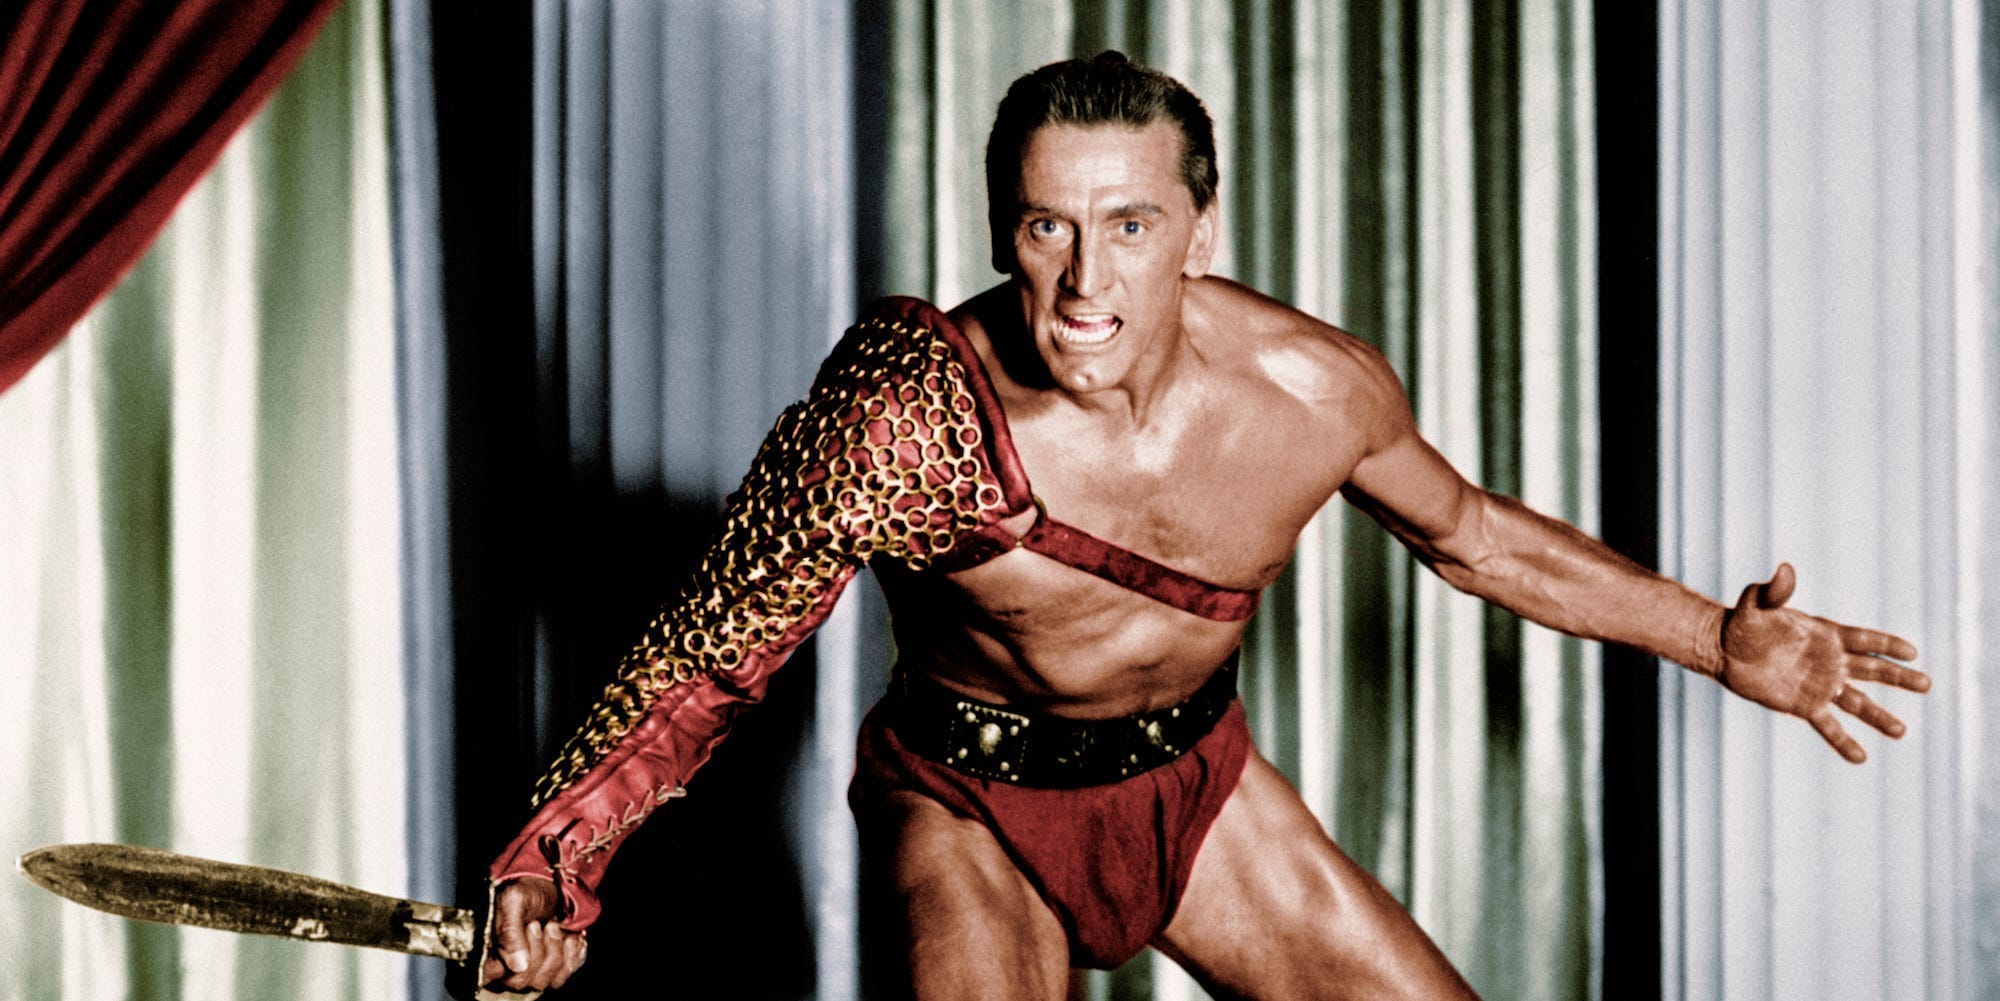 Kirk Douglas as Spartacus in the 1960 film of the same name.